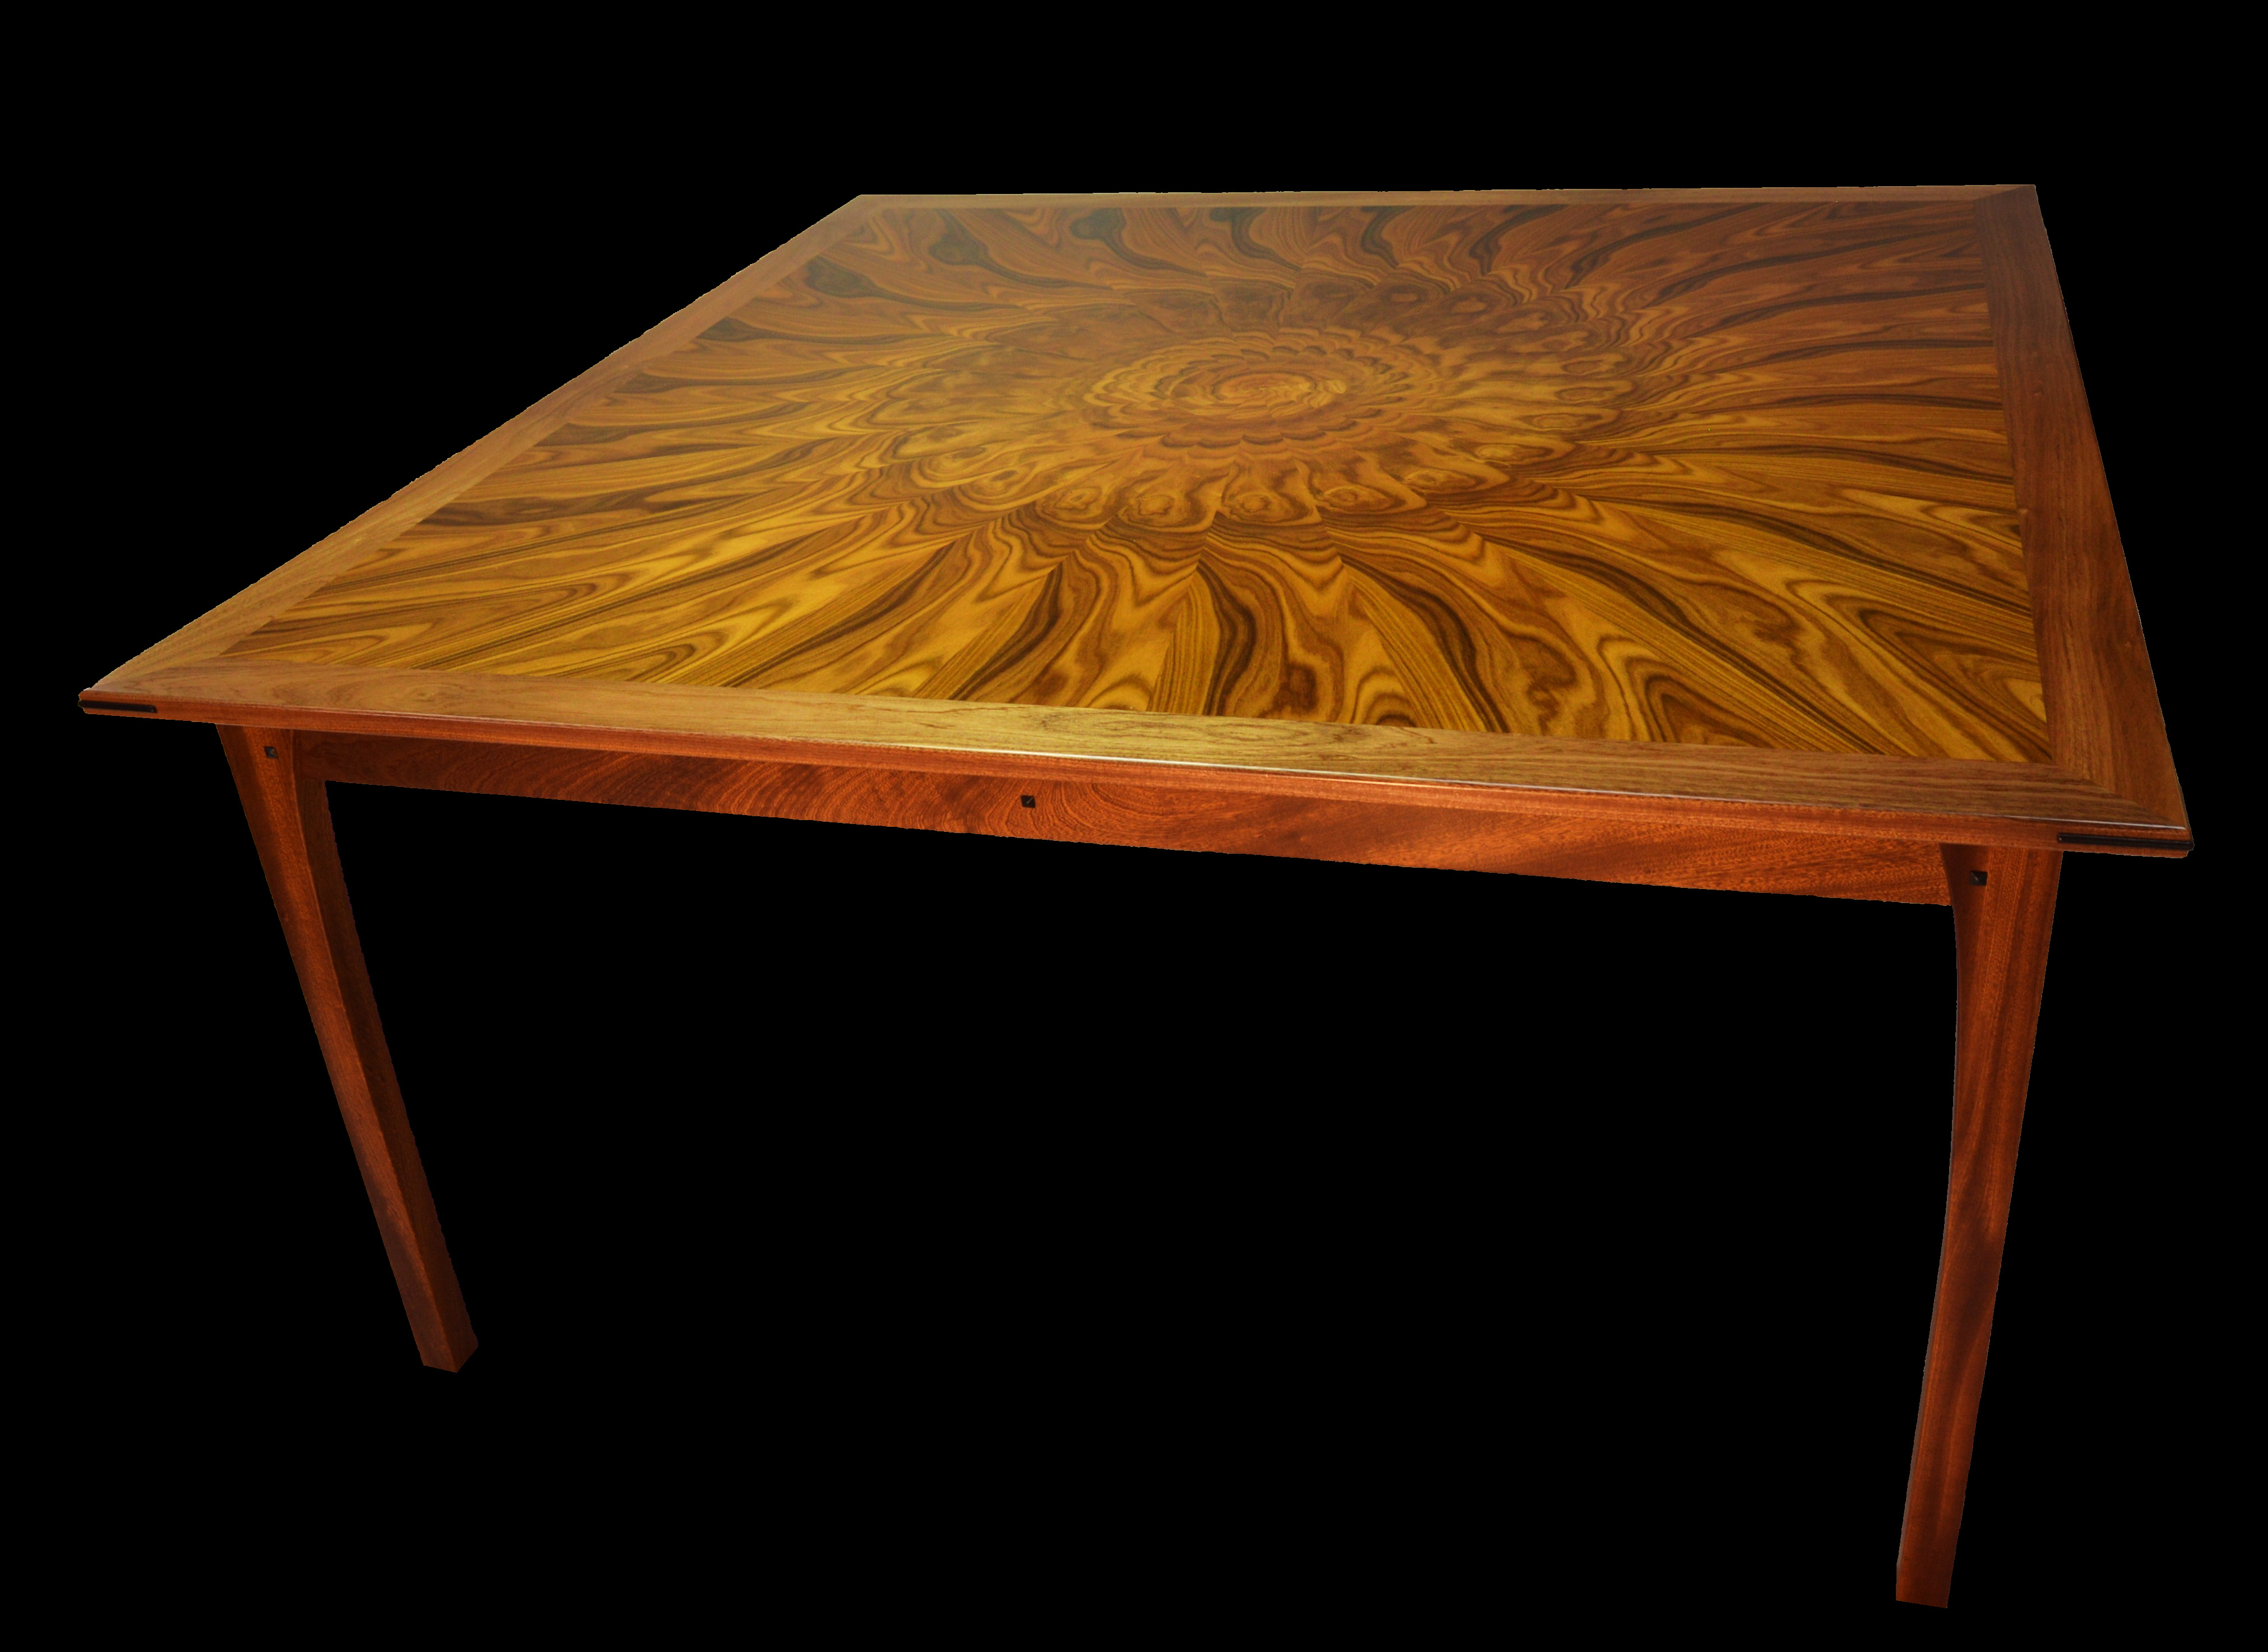 A Square Bolivian Rosewood Table by Don DeDobbeleer, Fine Custom Wood Furniture